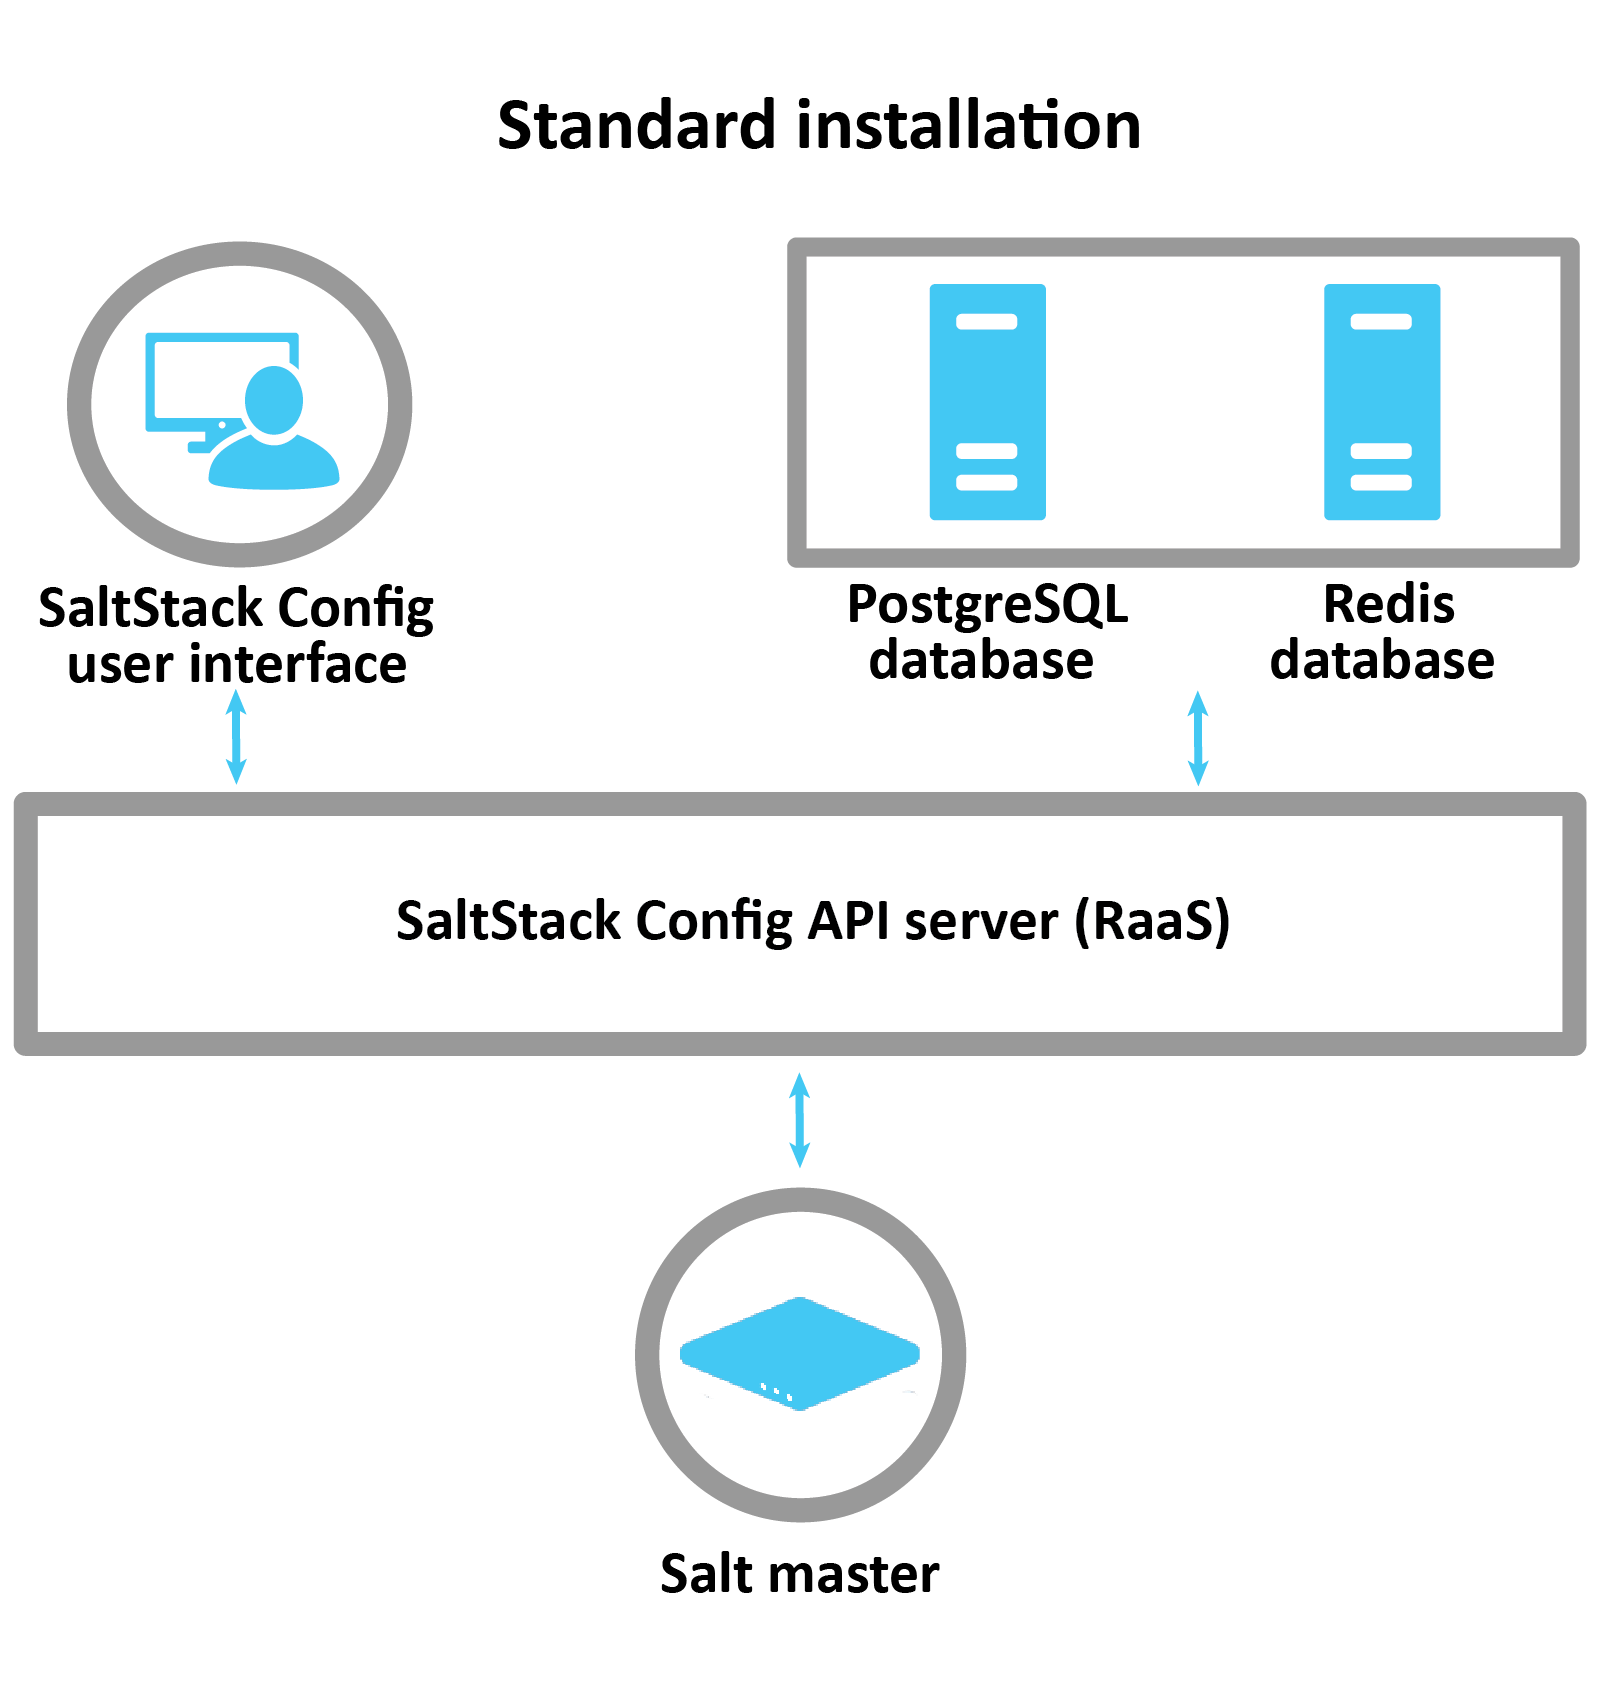 Diagram explaining how a standard installation of SaltStack works: vRA, Postgress and Redis connect to the RaaS server, which controls the Salt Master.